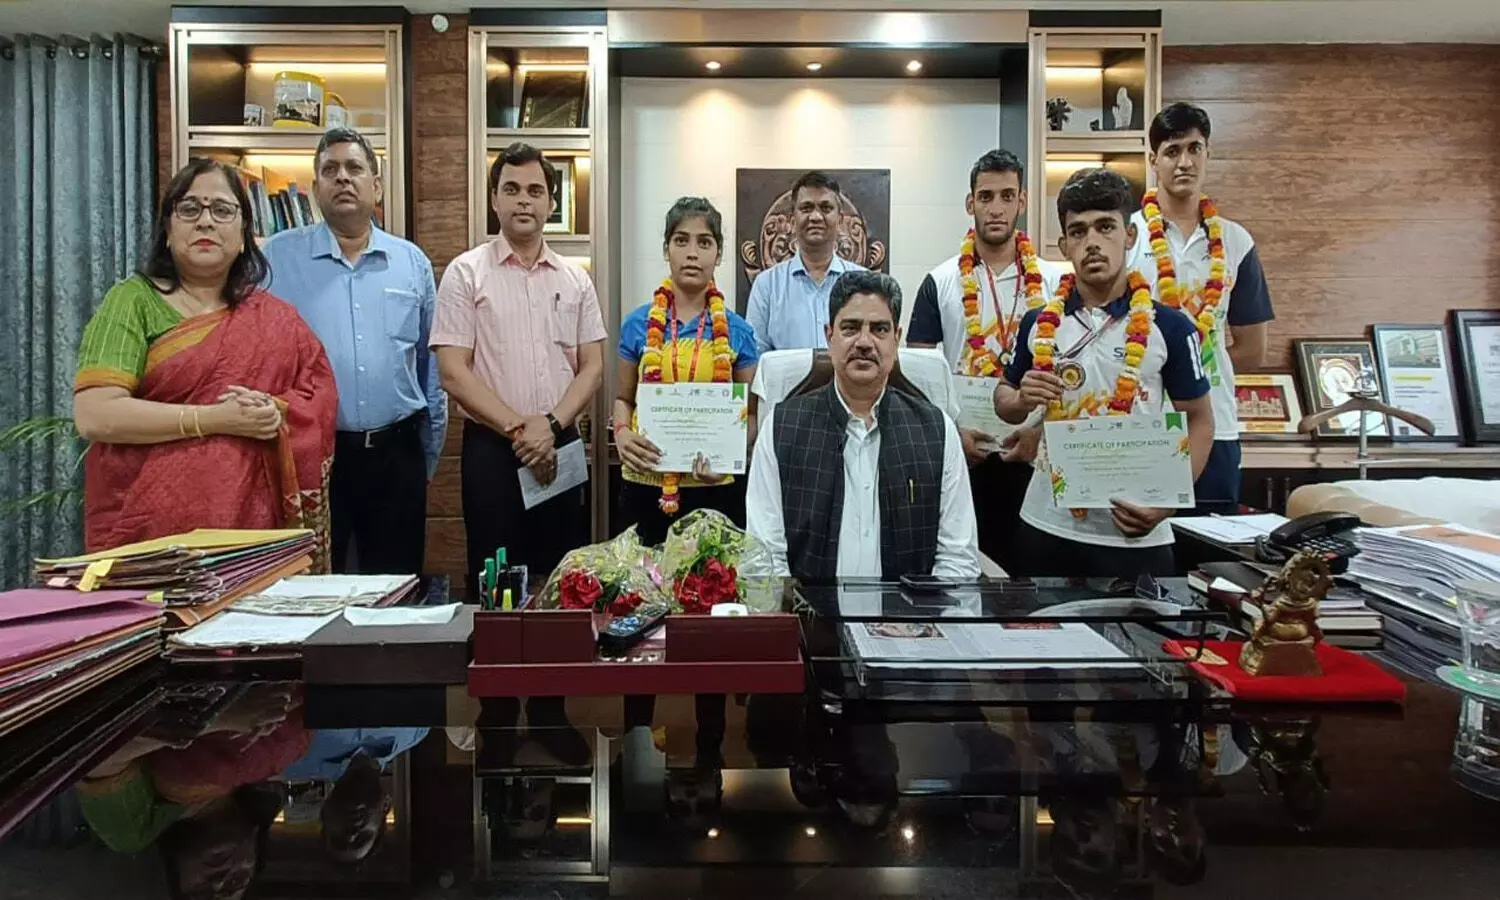 Winners of khelo India program were honored with certificates today